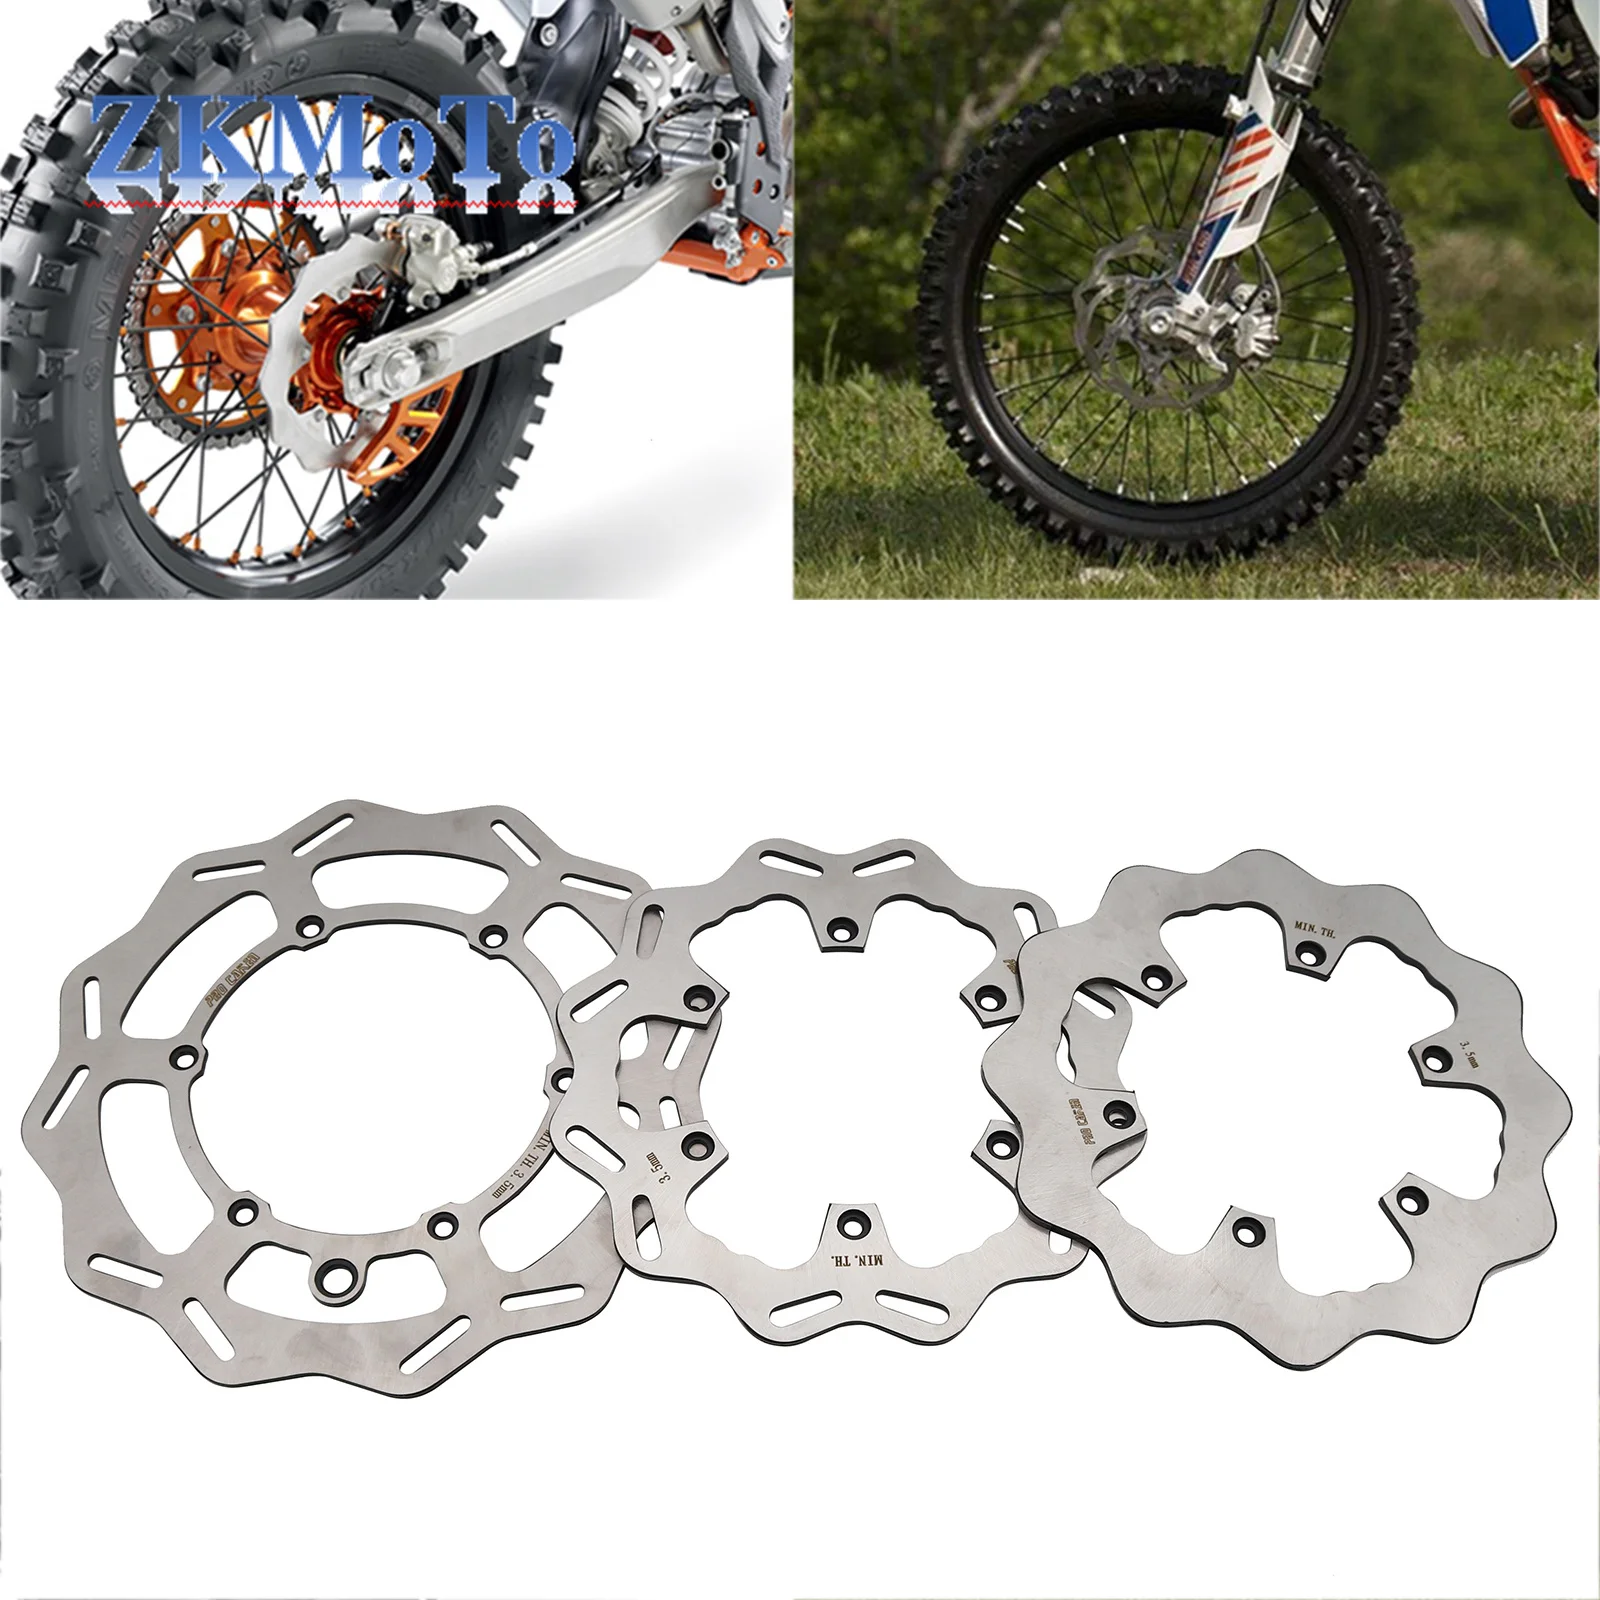 

Motorcycle 260MM 220MM Front Rear Brake Disc Brake Rotor Disk For KTM SX SXF XC XCF XCW EXC EXCF For Husqvarna FE TE FC TC TX FX